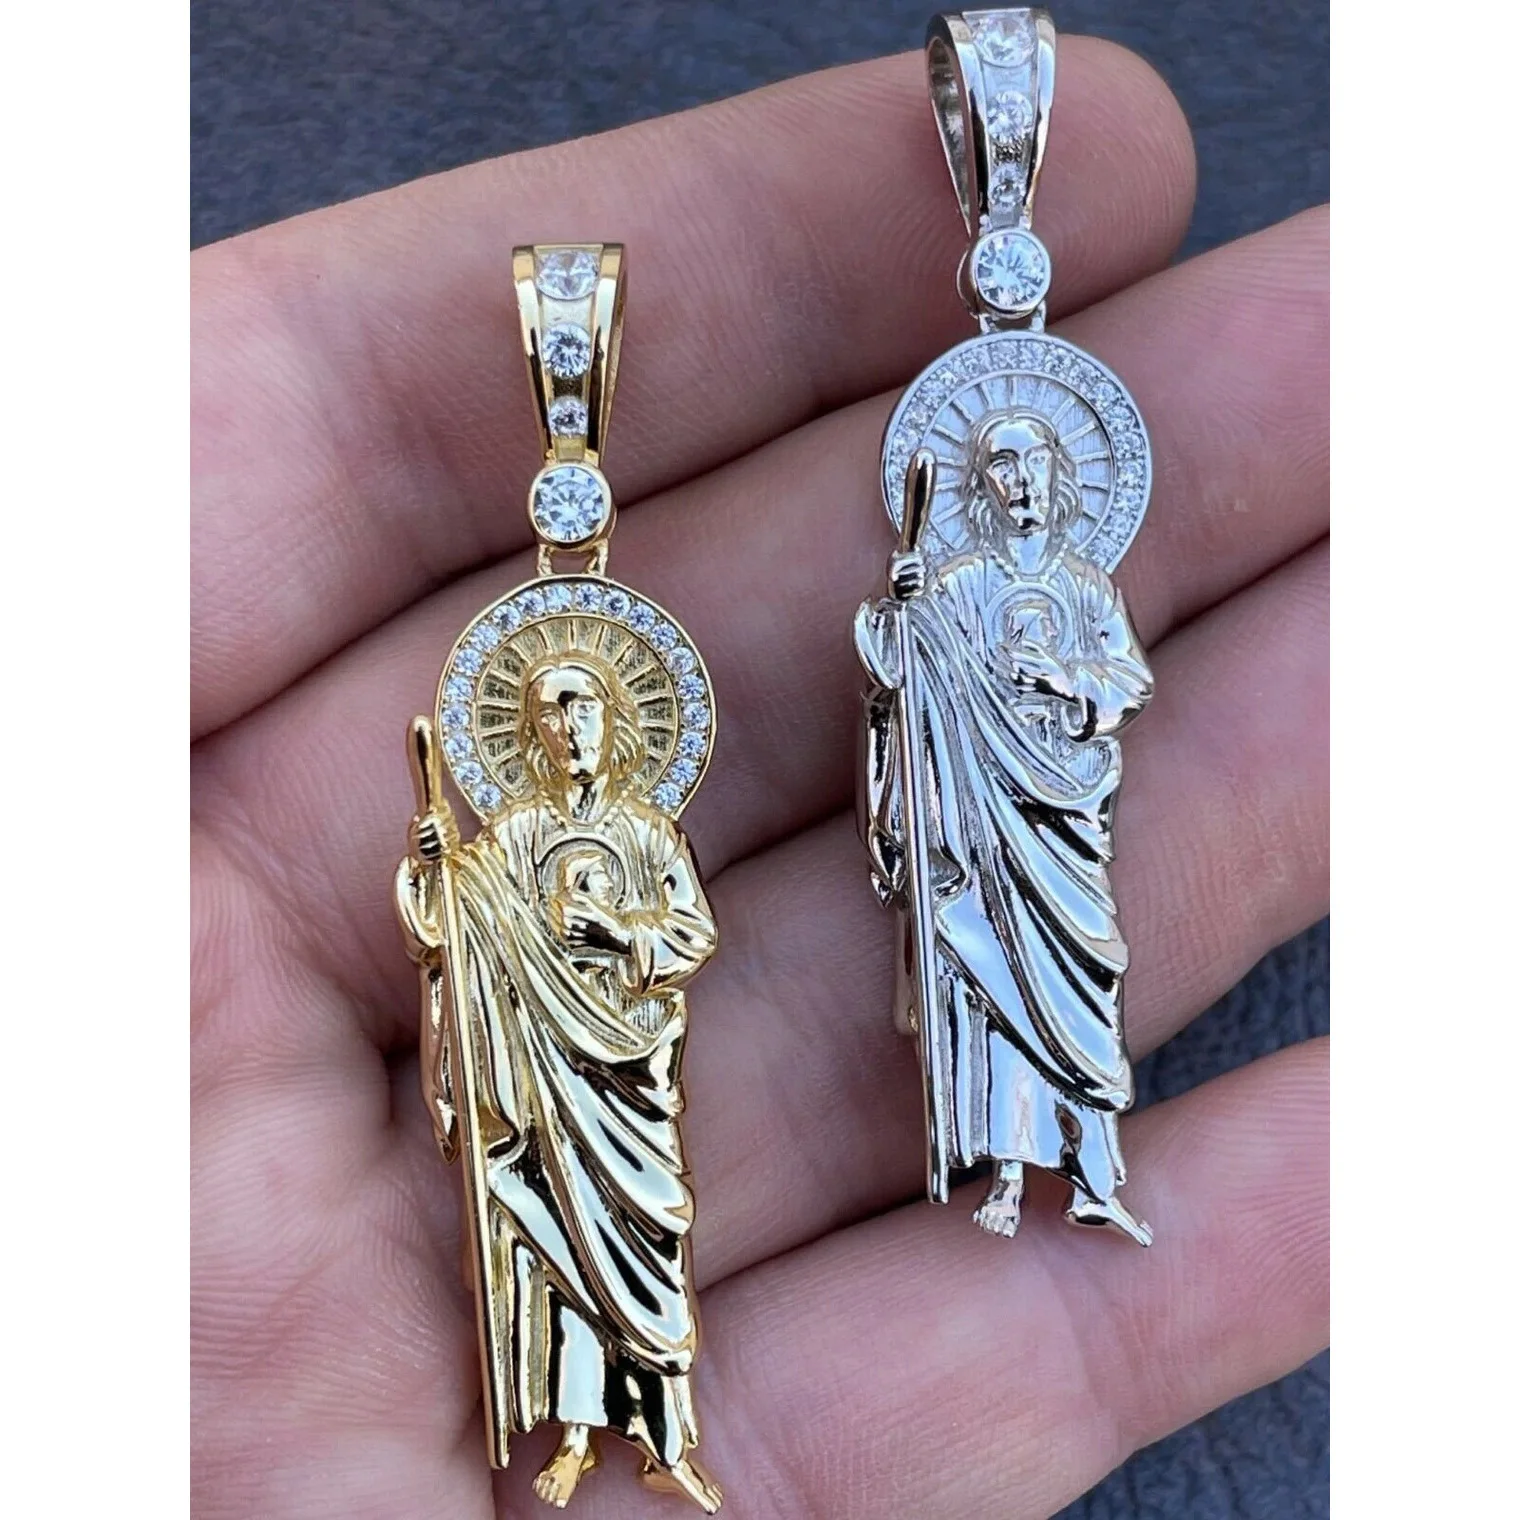 

Fine Jewelry st.jude white San Jude Pendants 18k Gold Silver Plated Iced Out CZ Religious Necklace san judas tadeo jewlery